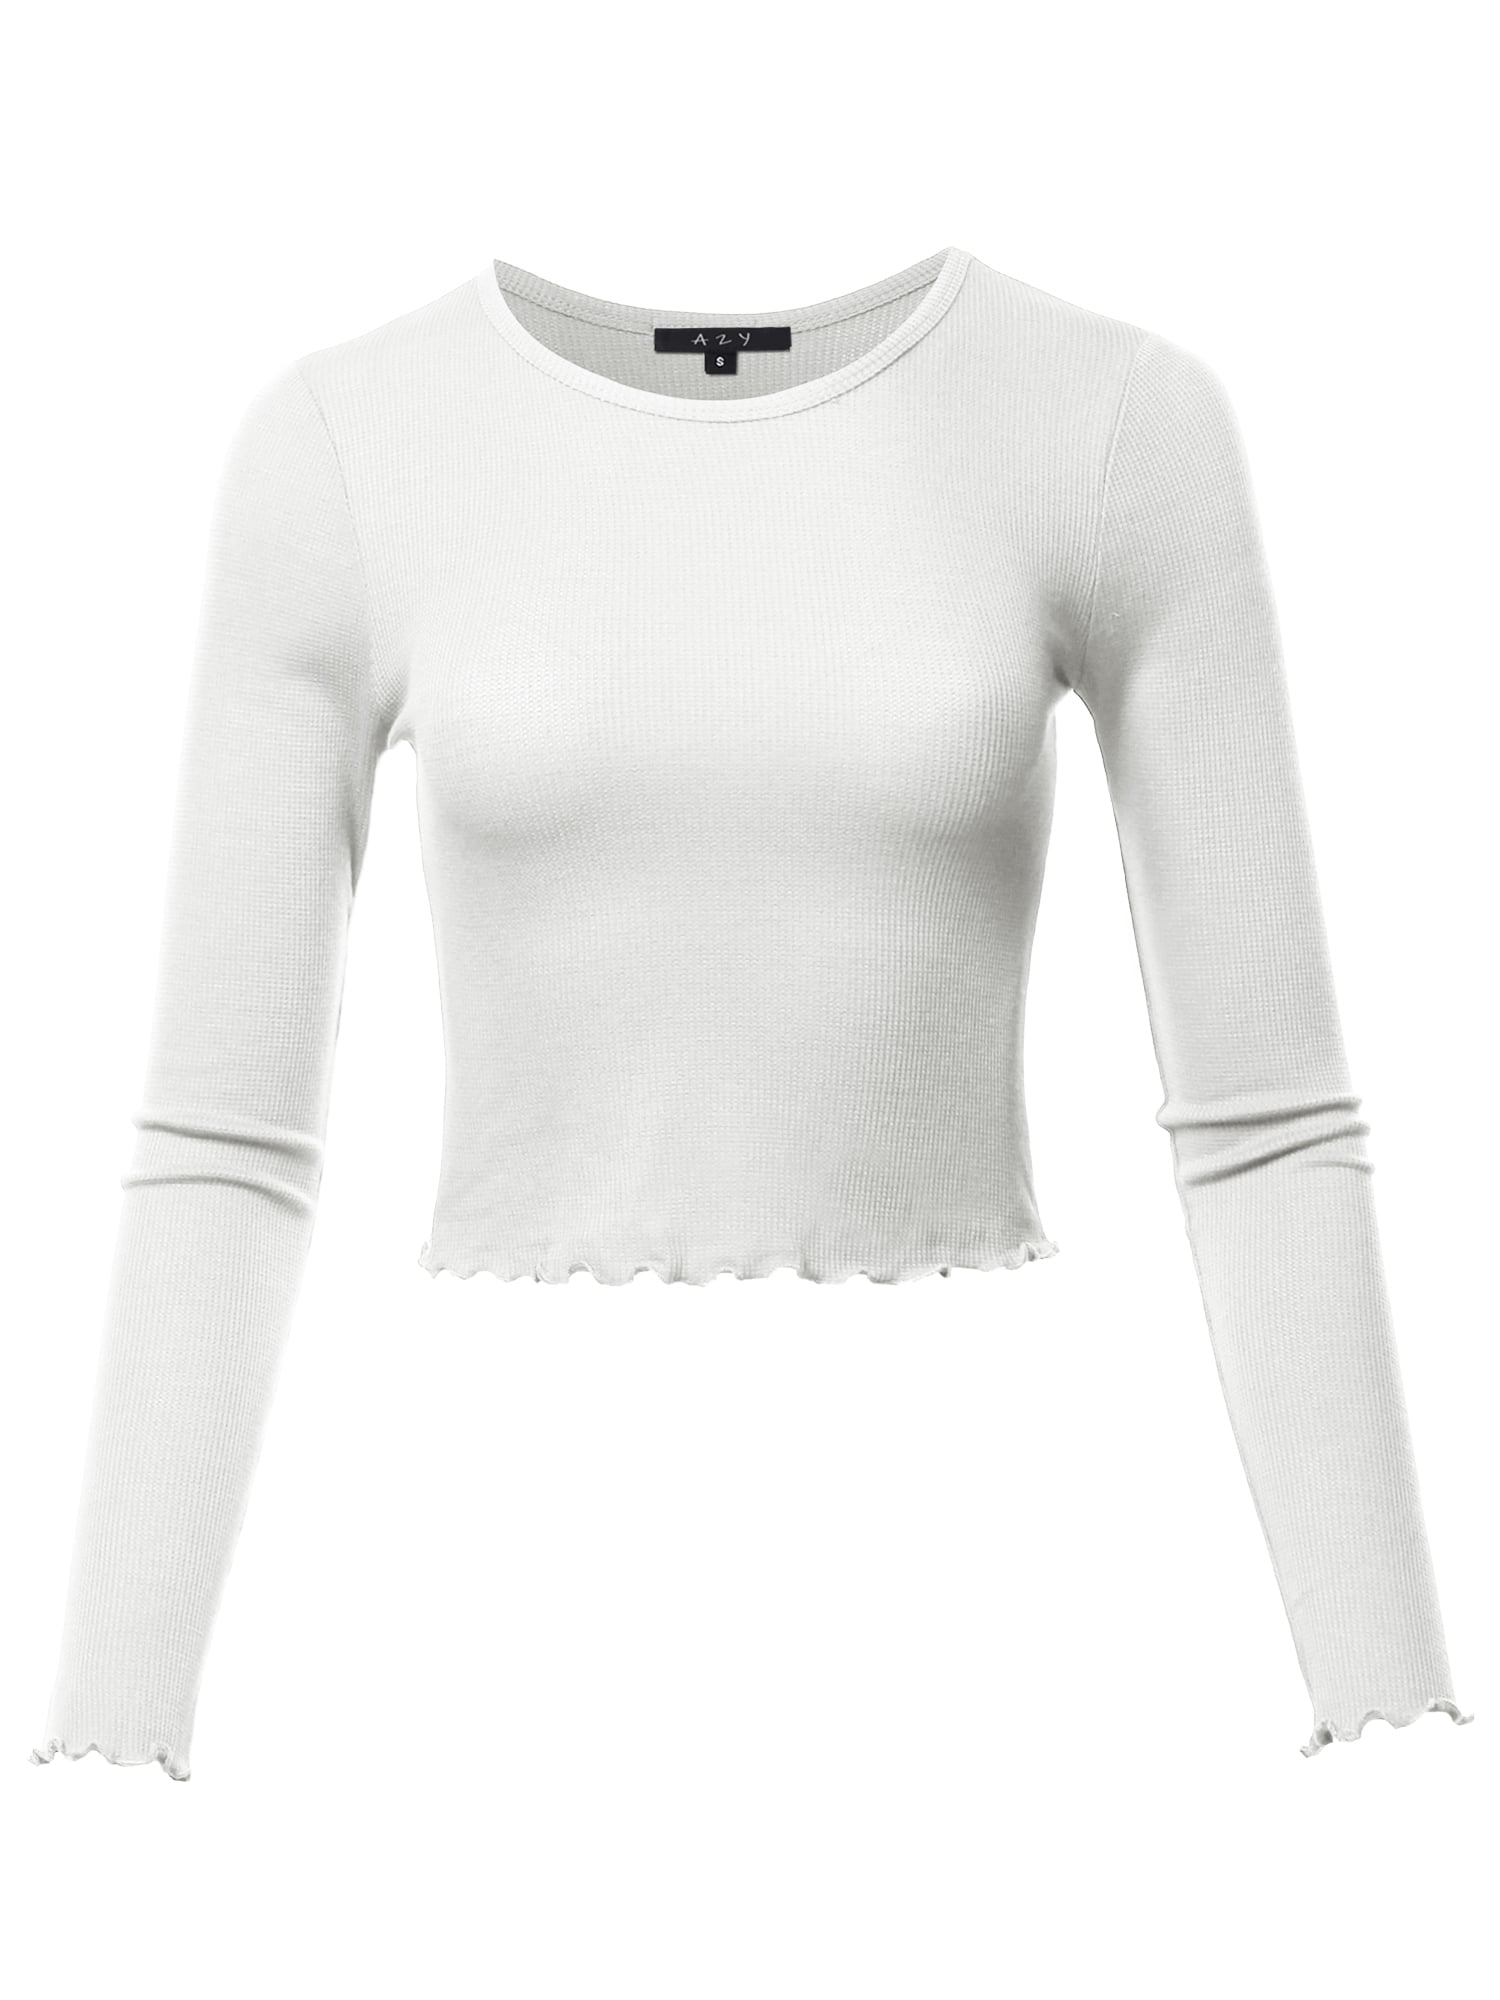 A2Y Women's Cropped Lightweight Long Sleeve Merrow Edge Thermal Tops ...